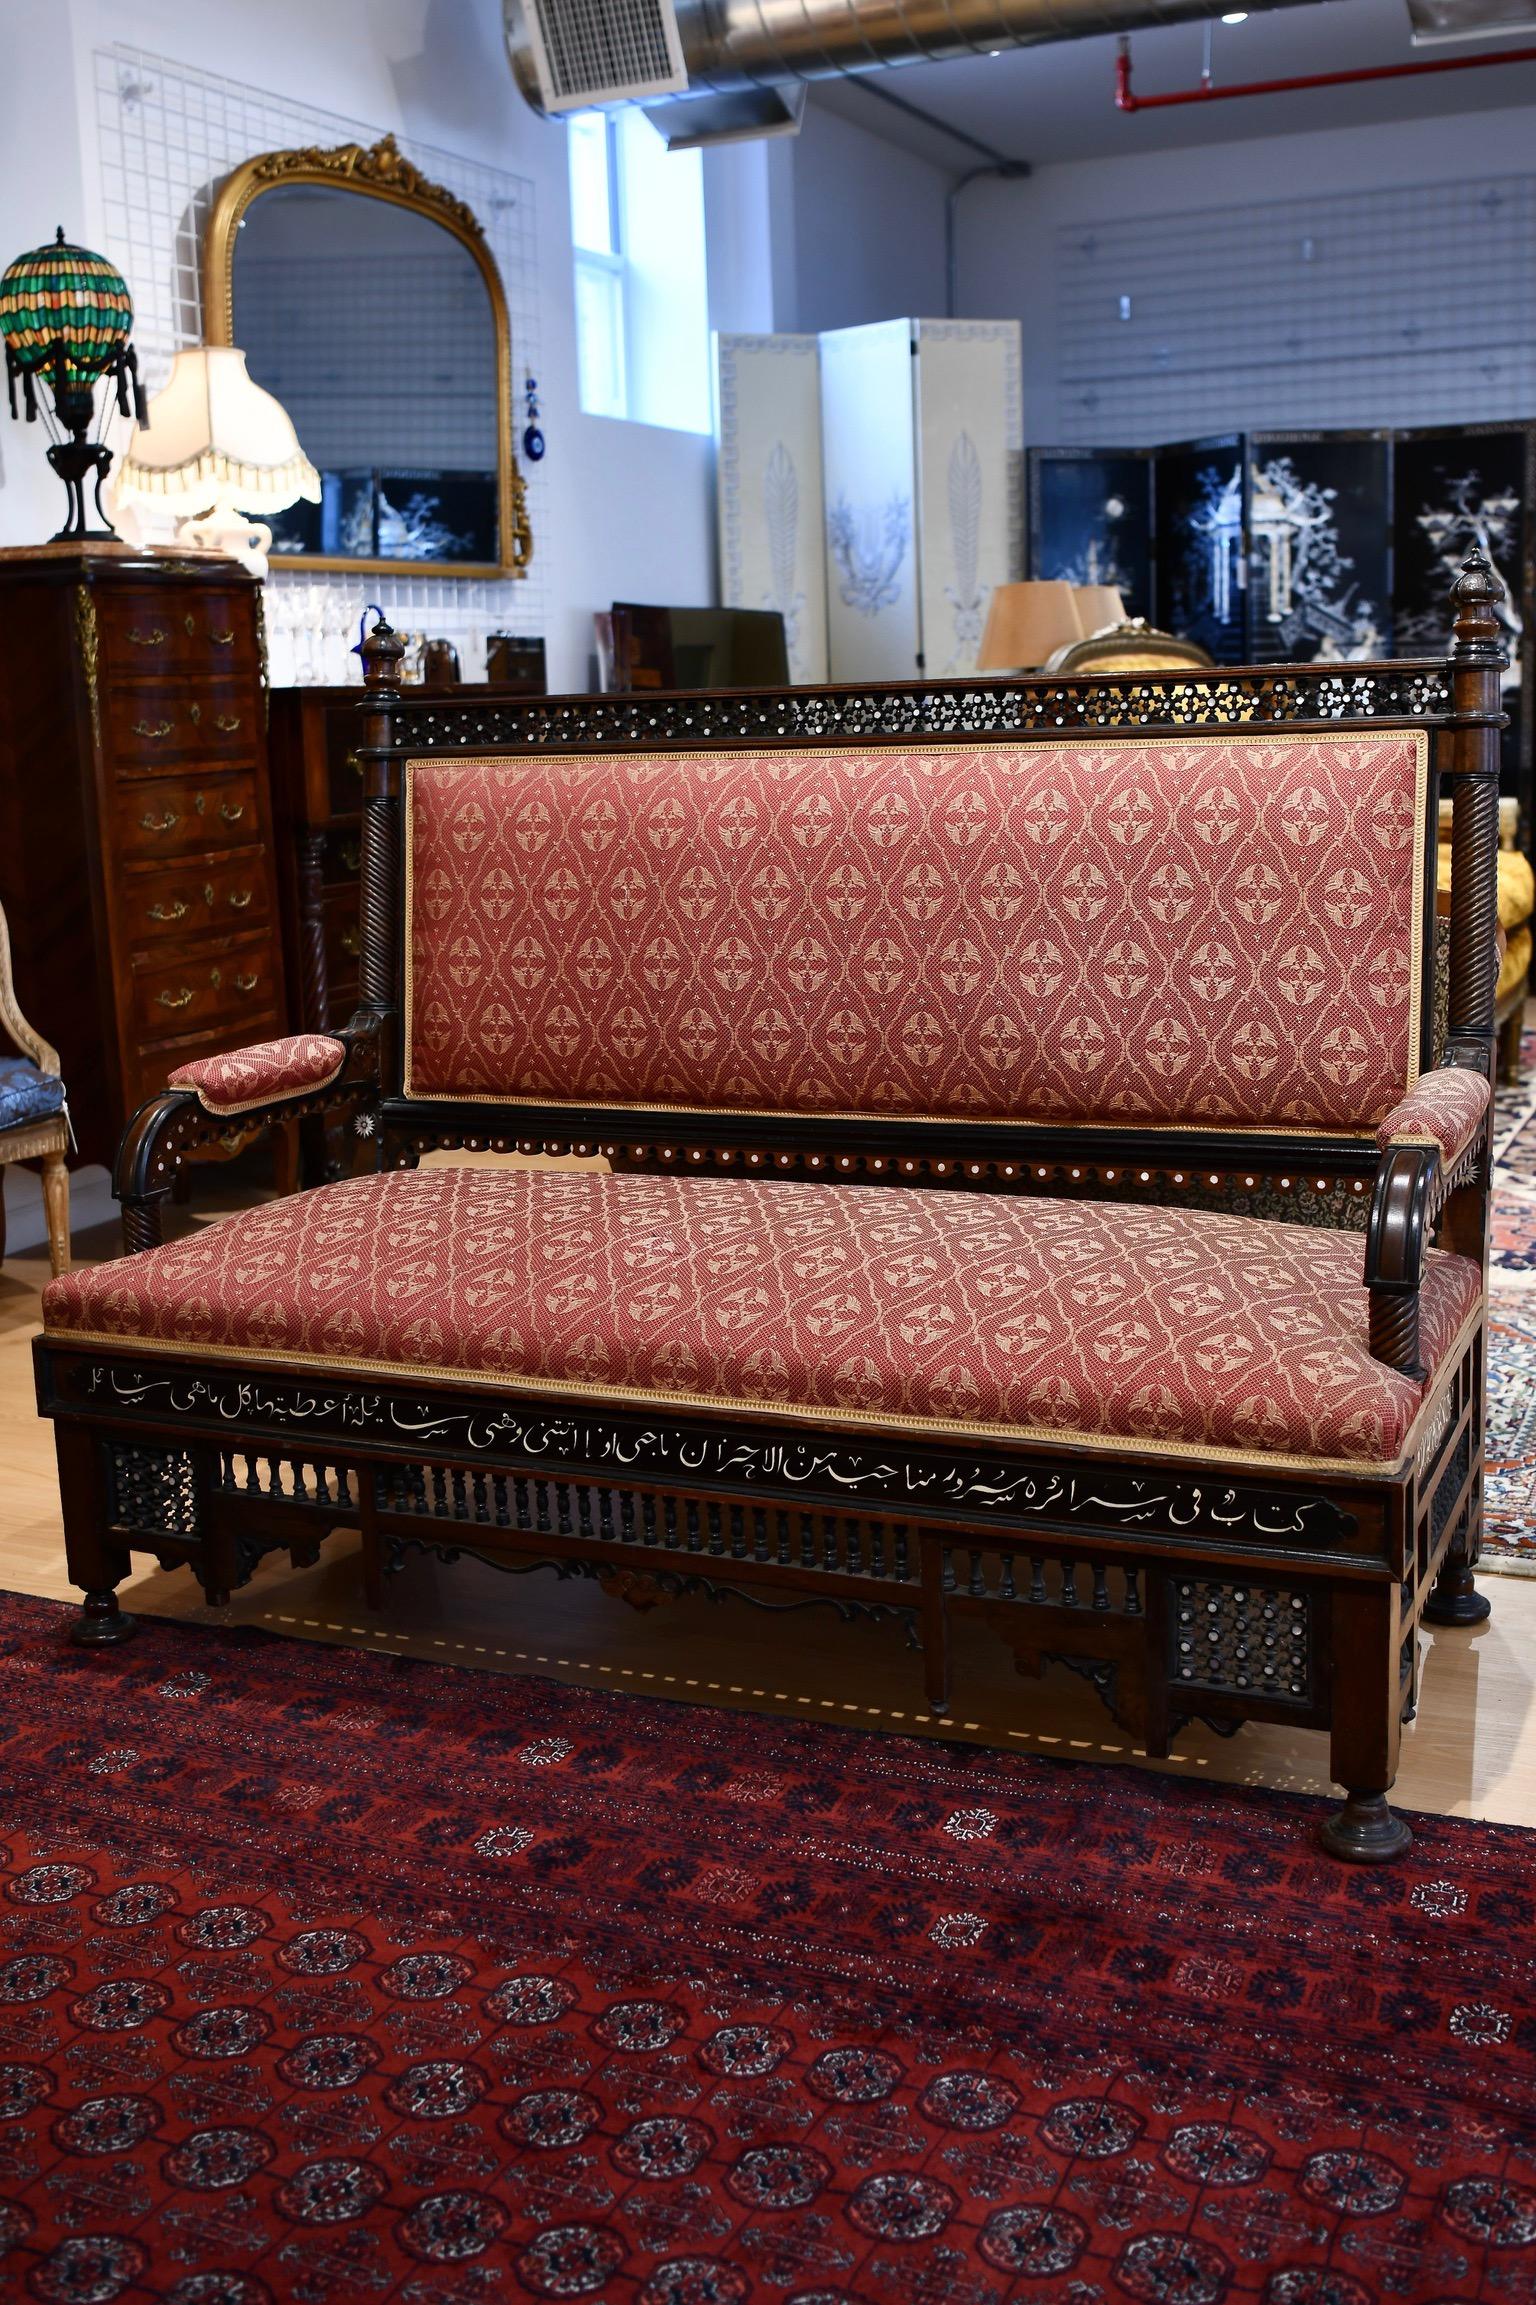 Syrian sofa circa 1900 with mother of pearl details, including Arabic calligraphy and motifs throughout, intricately carved woodwork, and red floral upholstery. Minor imperfection to upholstery but in overall very good condition. Dimensions: 42